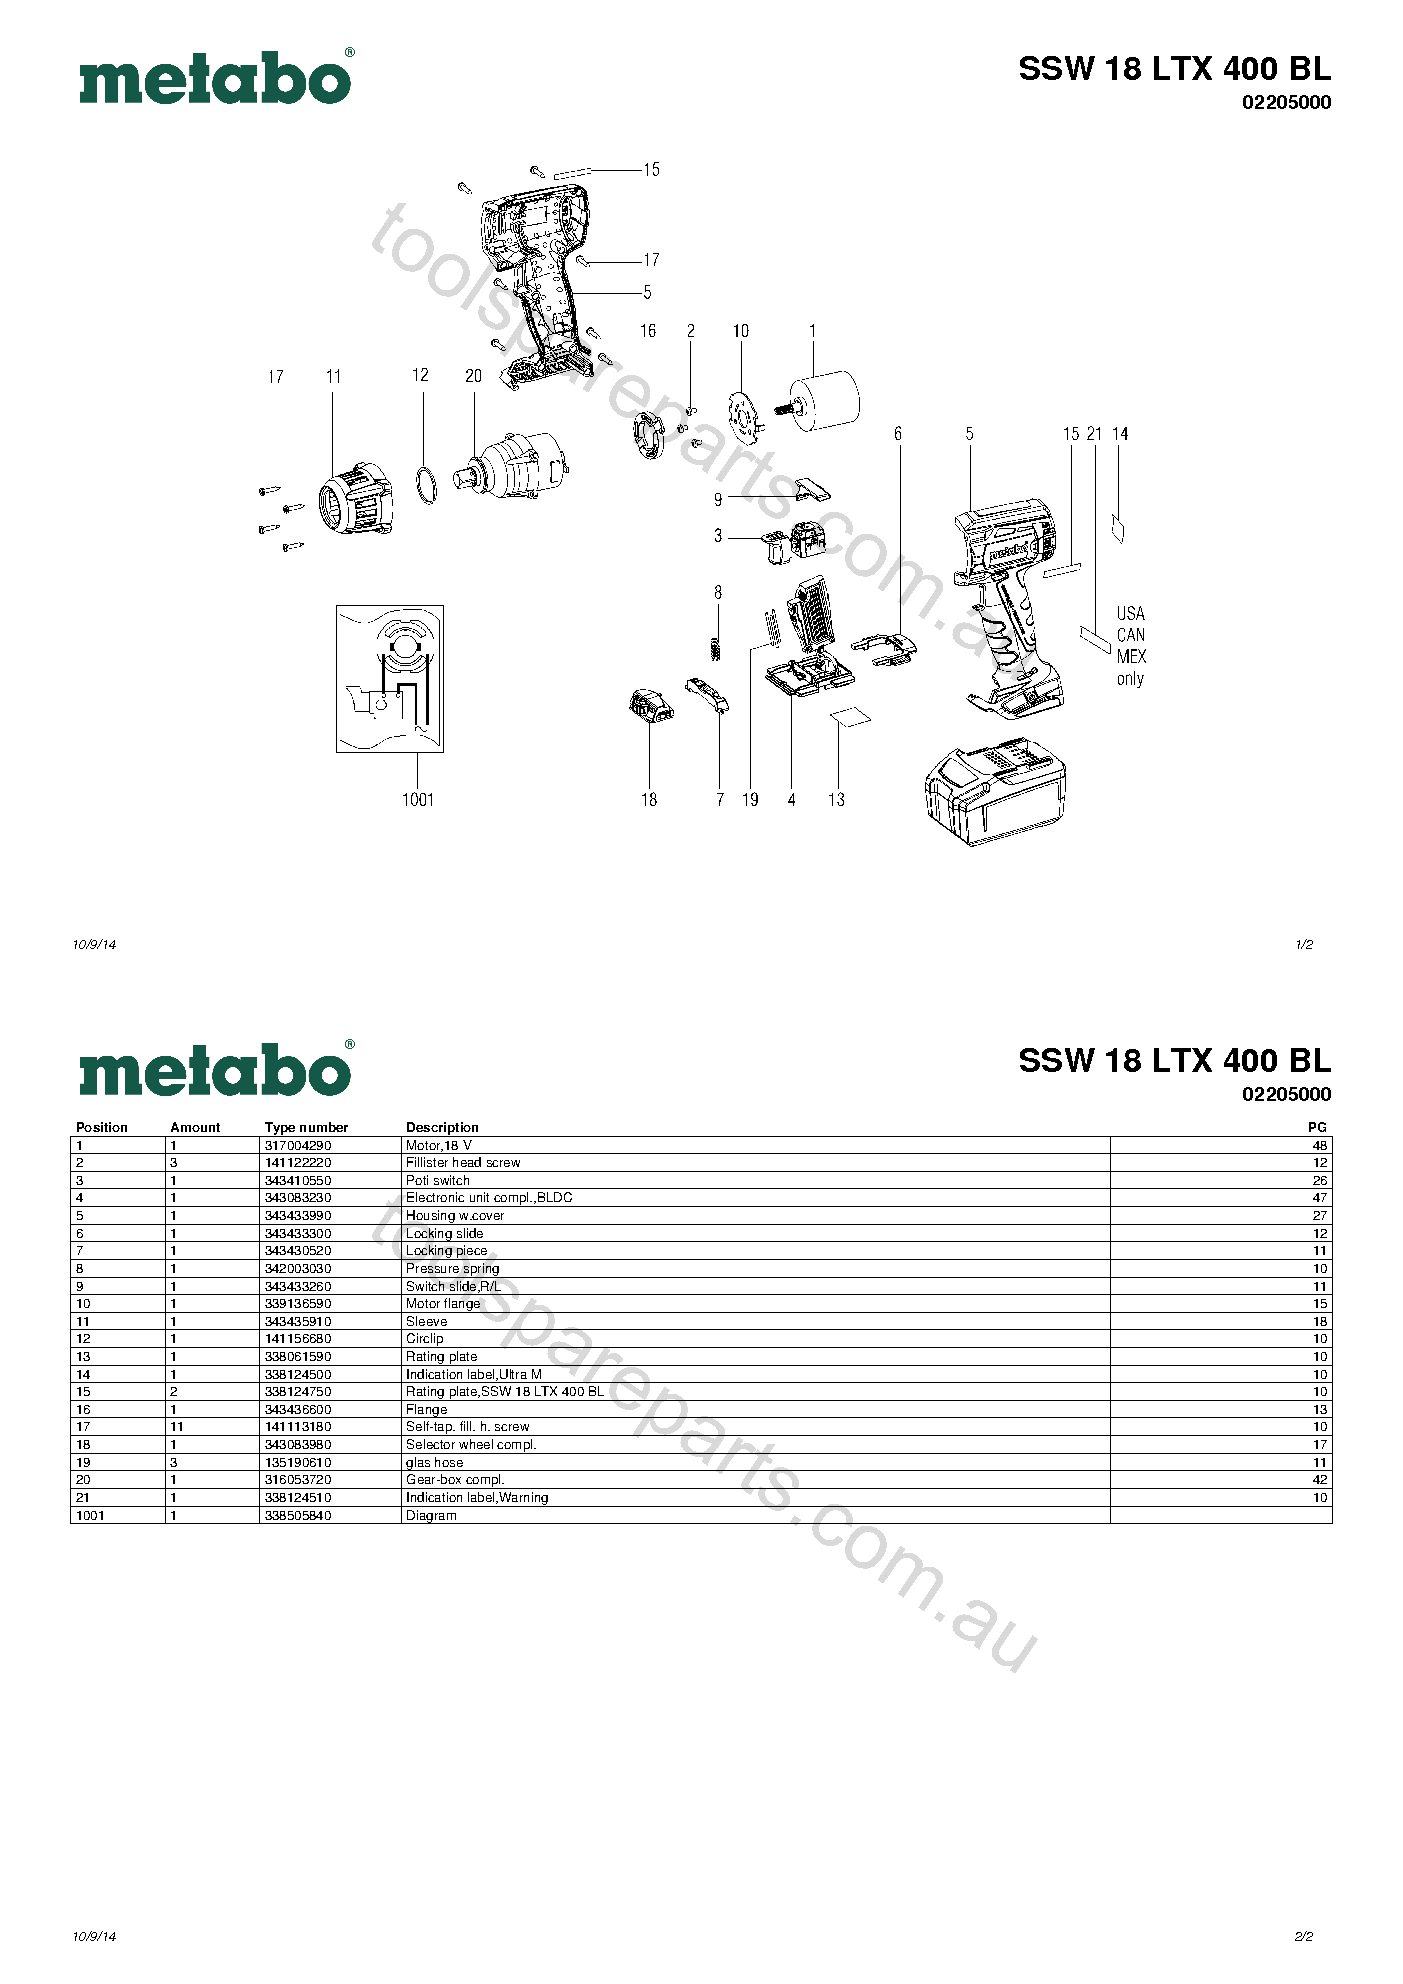 Metabo impact spare parts catalog